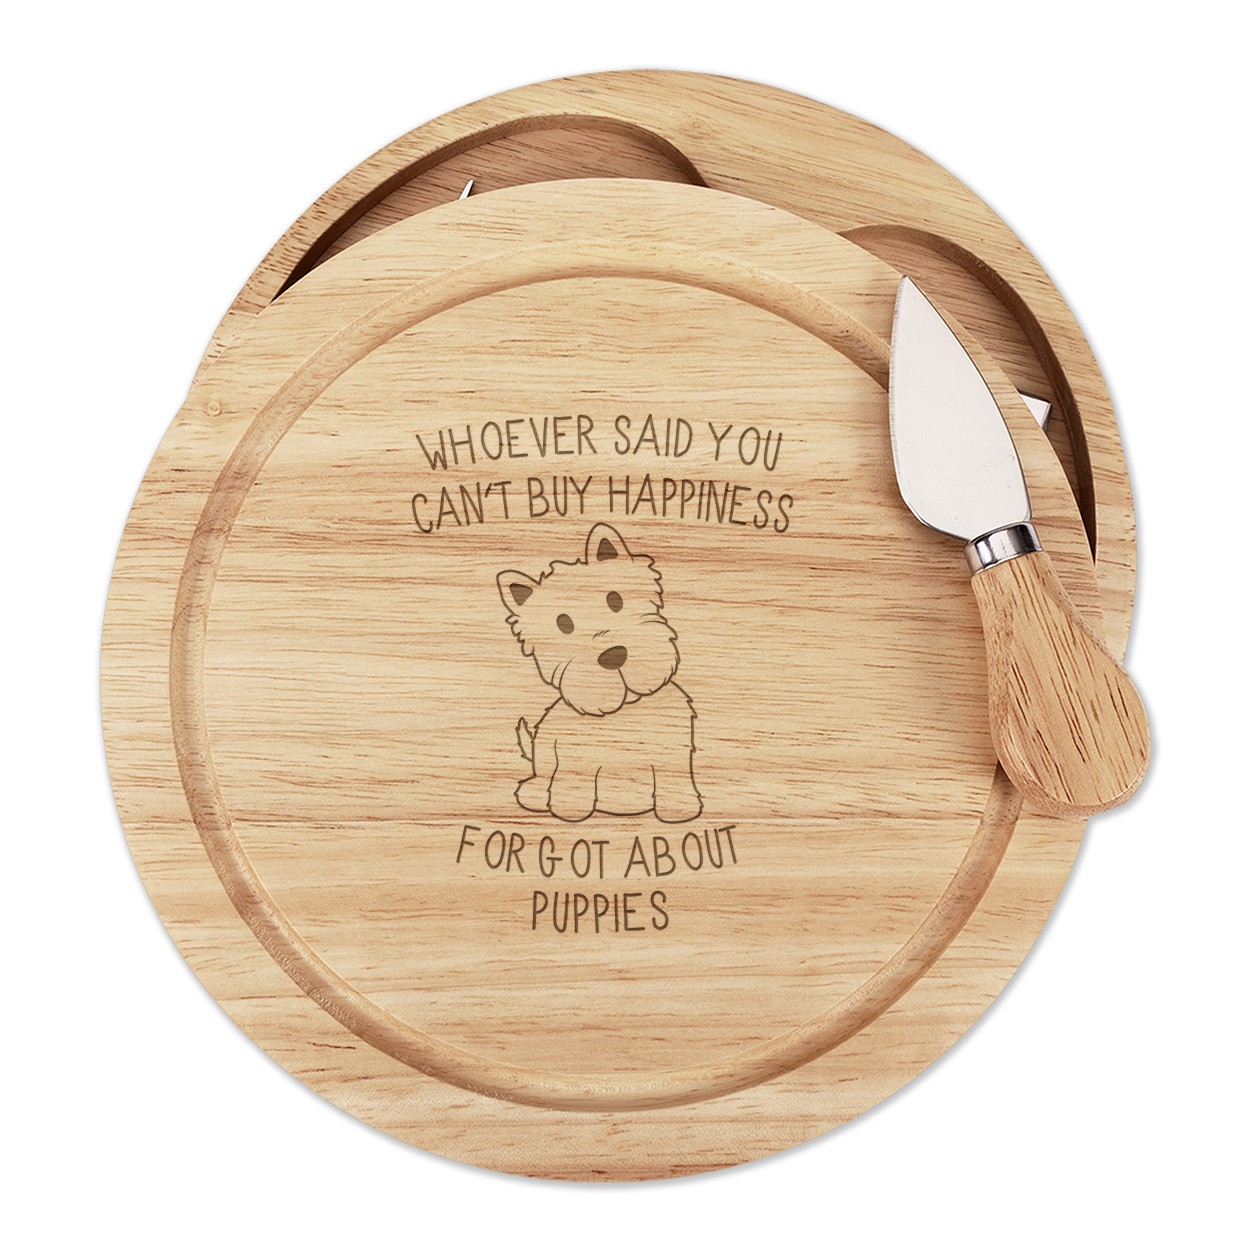 Whoever Said You Can't Buy Happiness Forgot About Puppies Wooden Cheese Board Set 4 Knives